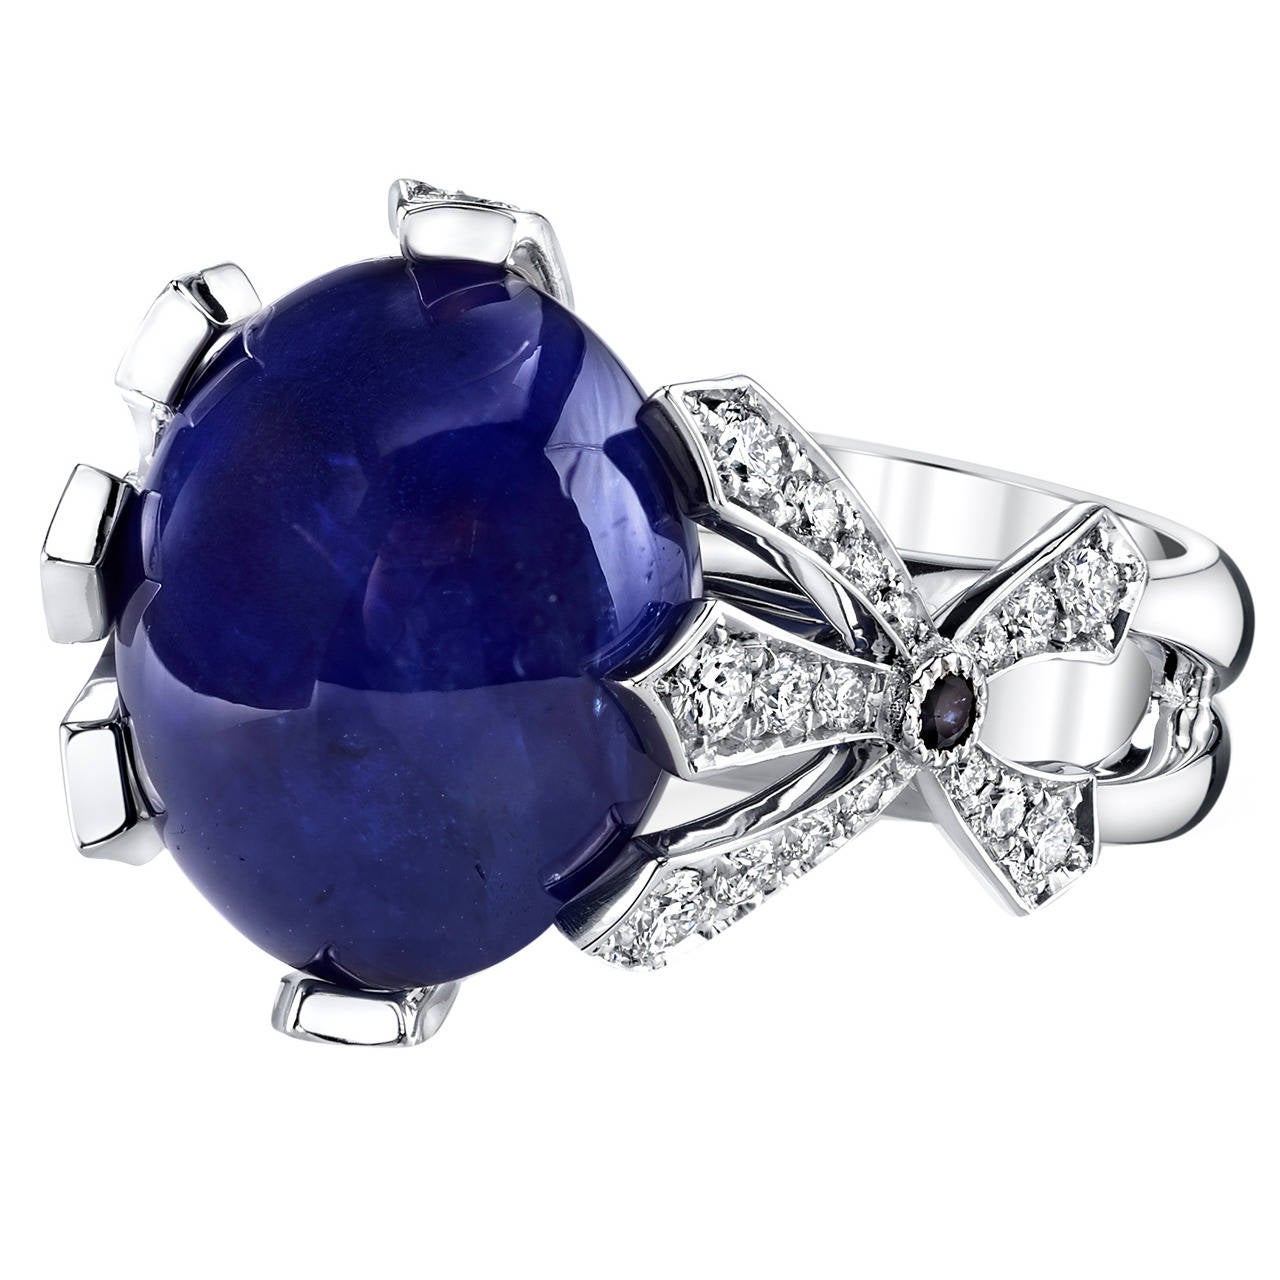 GIA Certified Cabochon Sapphire Diamond Gold Ring For Sale